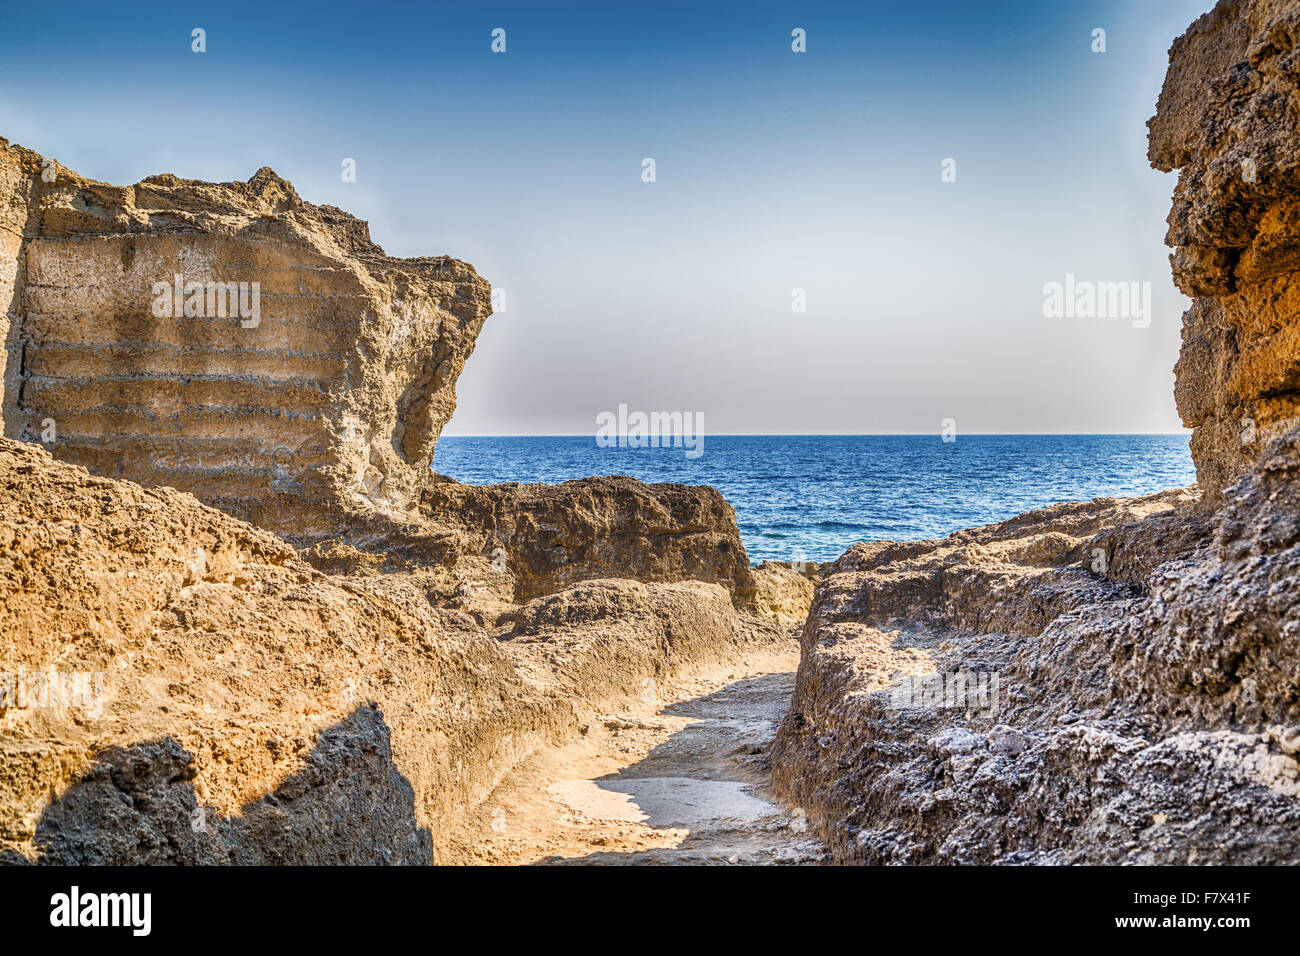 rocks and coves of the coast of Salento of the Ionian Sea in Italy,  near Tricase, Lecce, Apulia Stock Photo